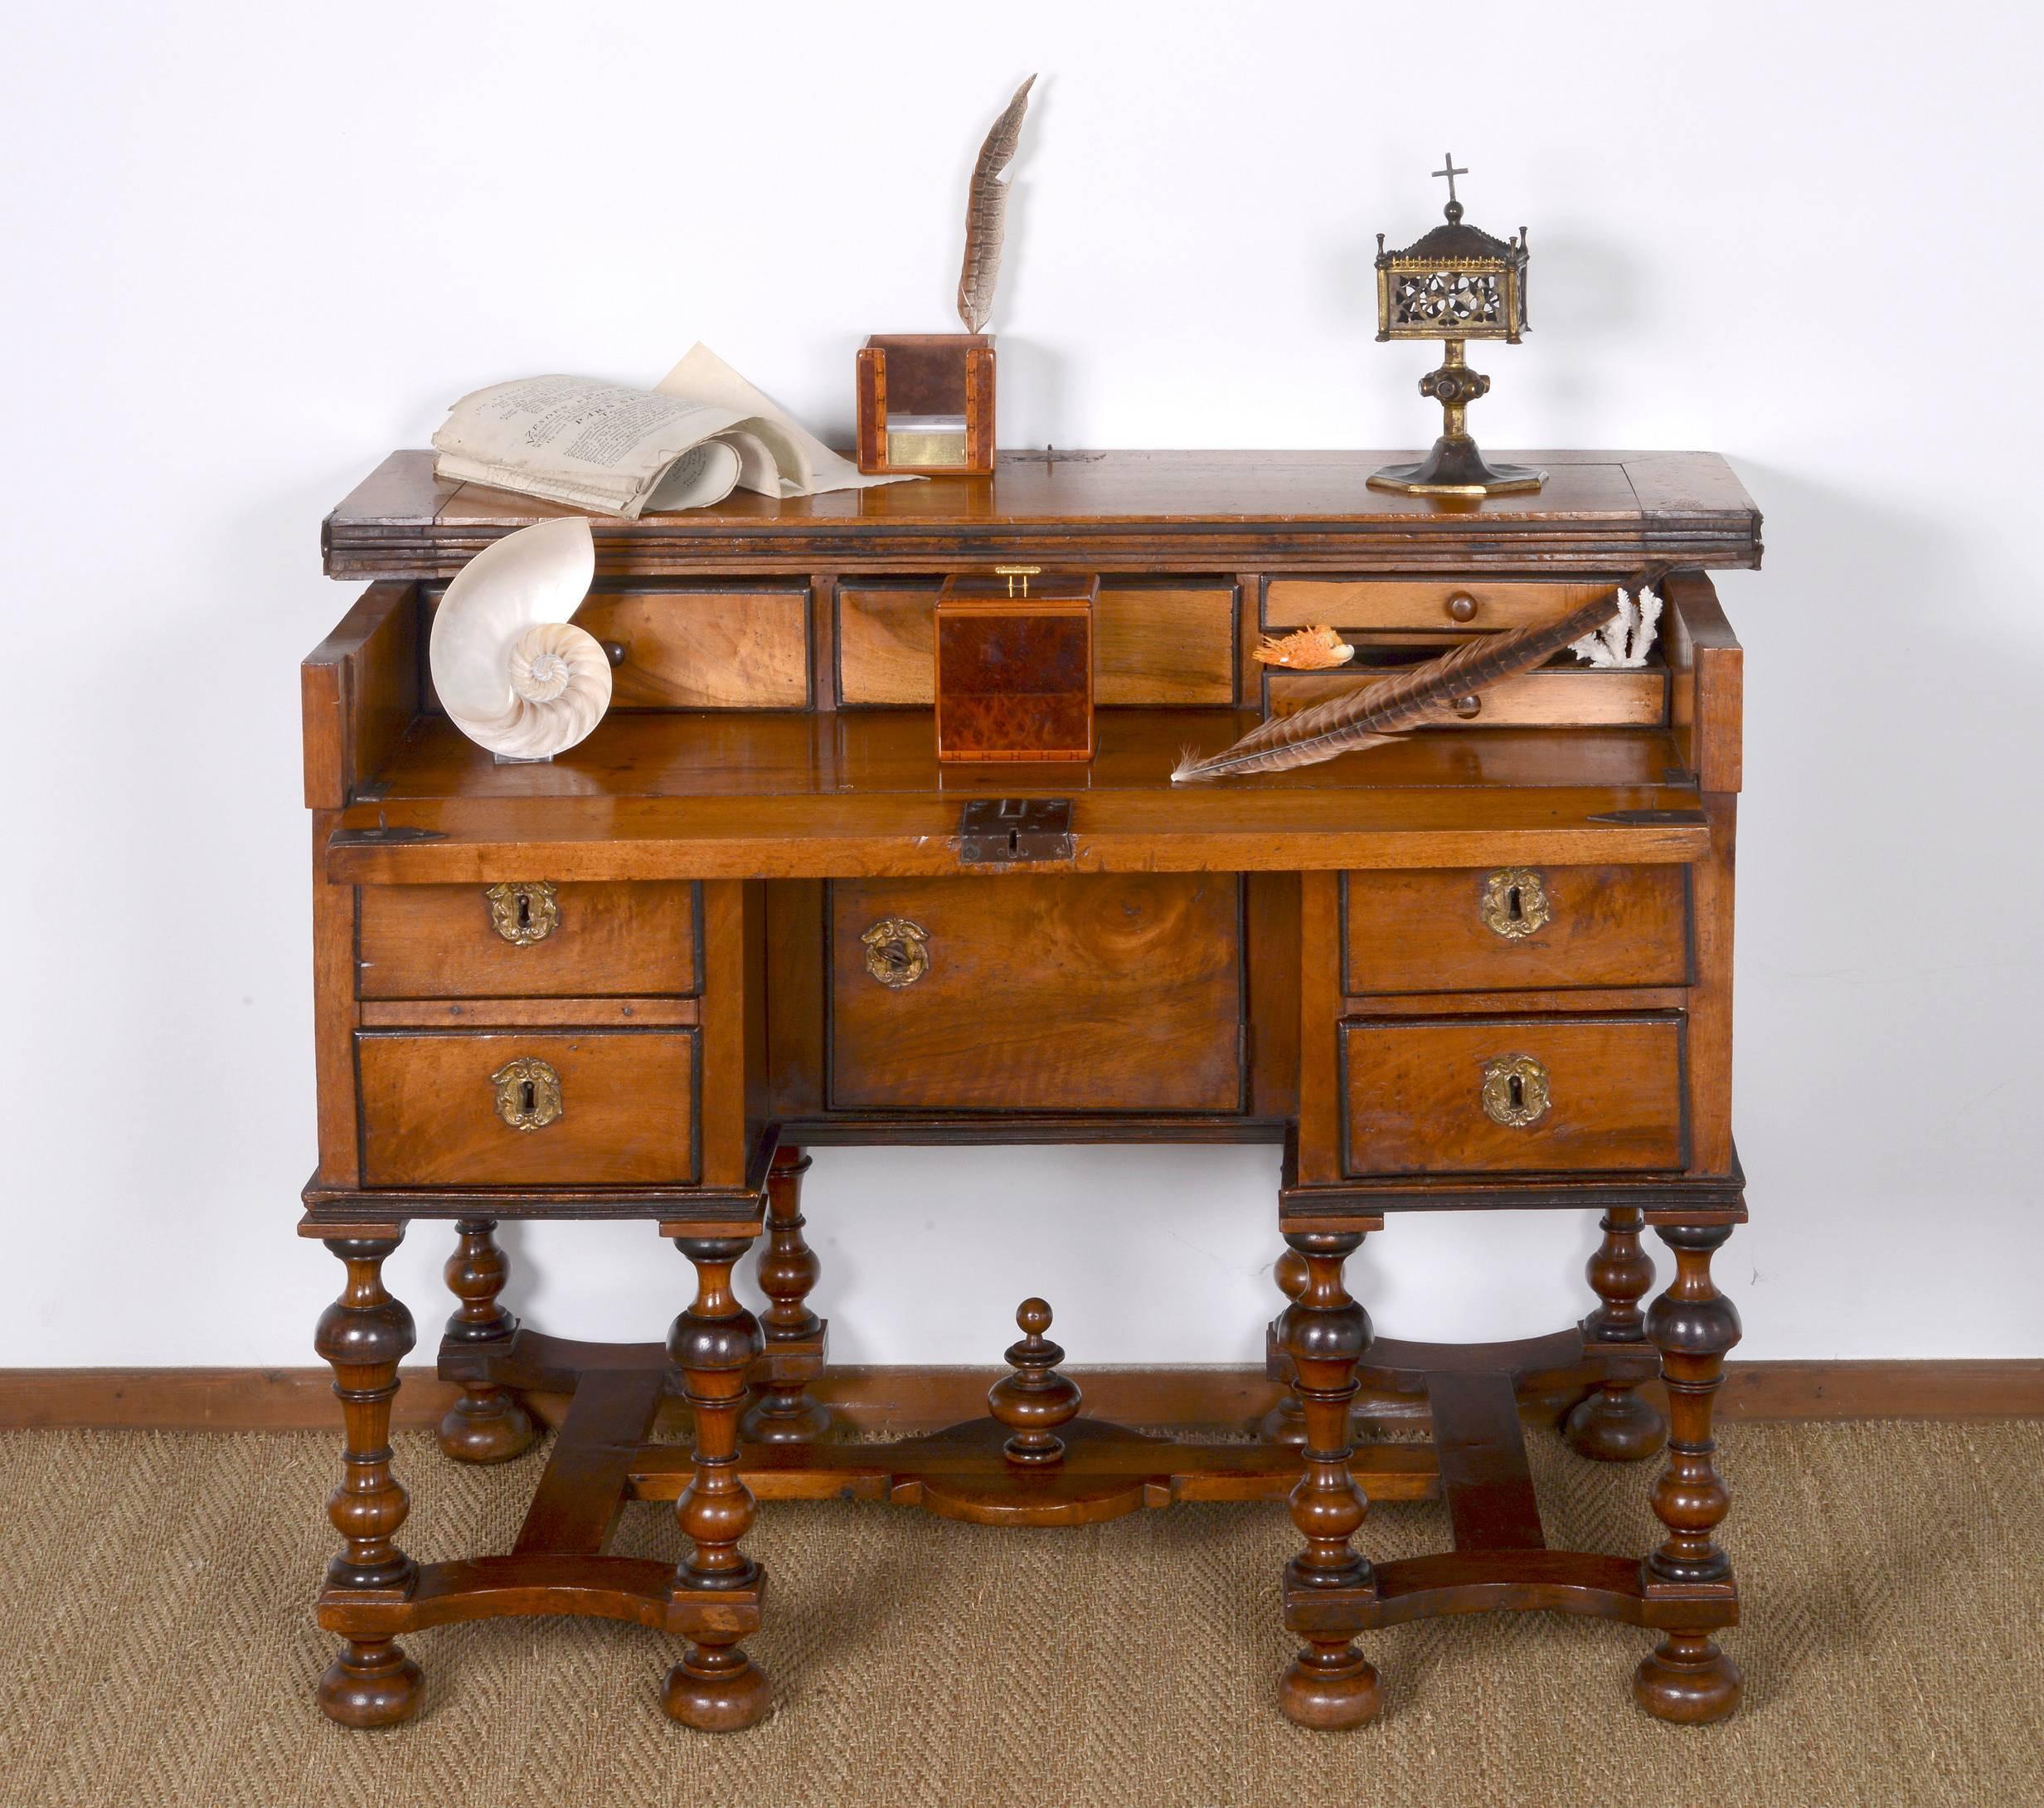 The ‘Bureau Mazarin’ is a 17th century desk form named in memory of Cardinal Mazarin, premier ministre of France from 1642 to 1661. It is the earliest predecessor of the pedestal desk and differs from it by having only two tiers of drawers or three